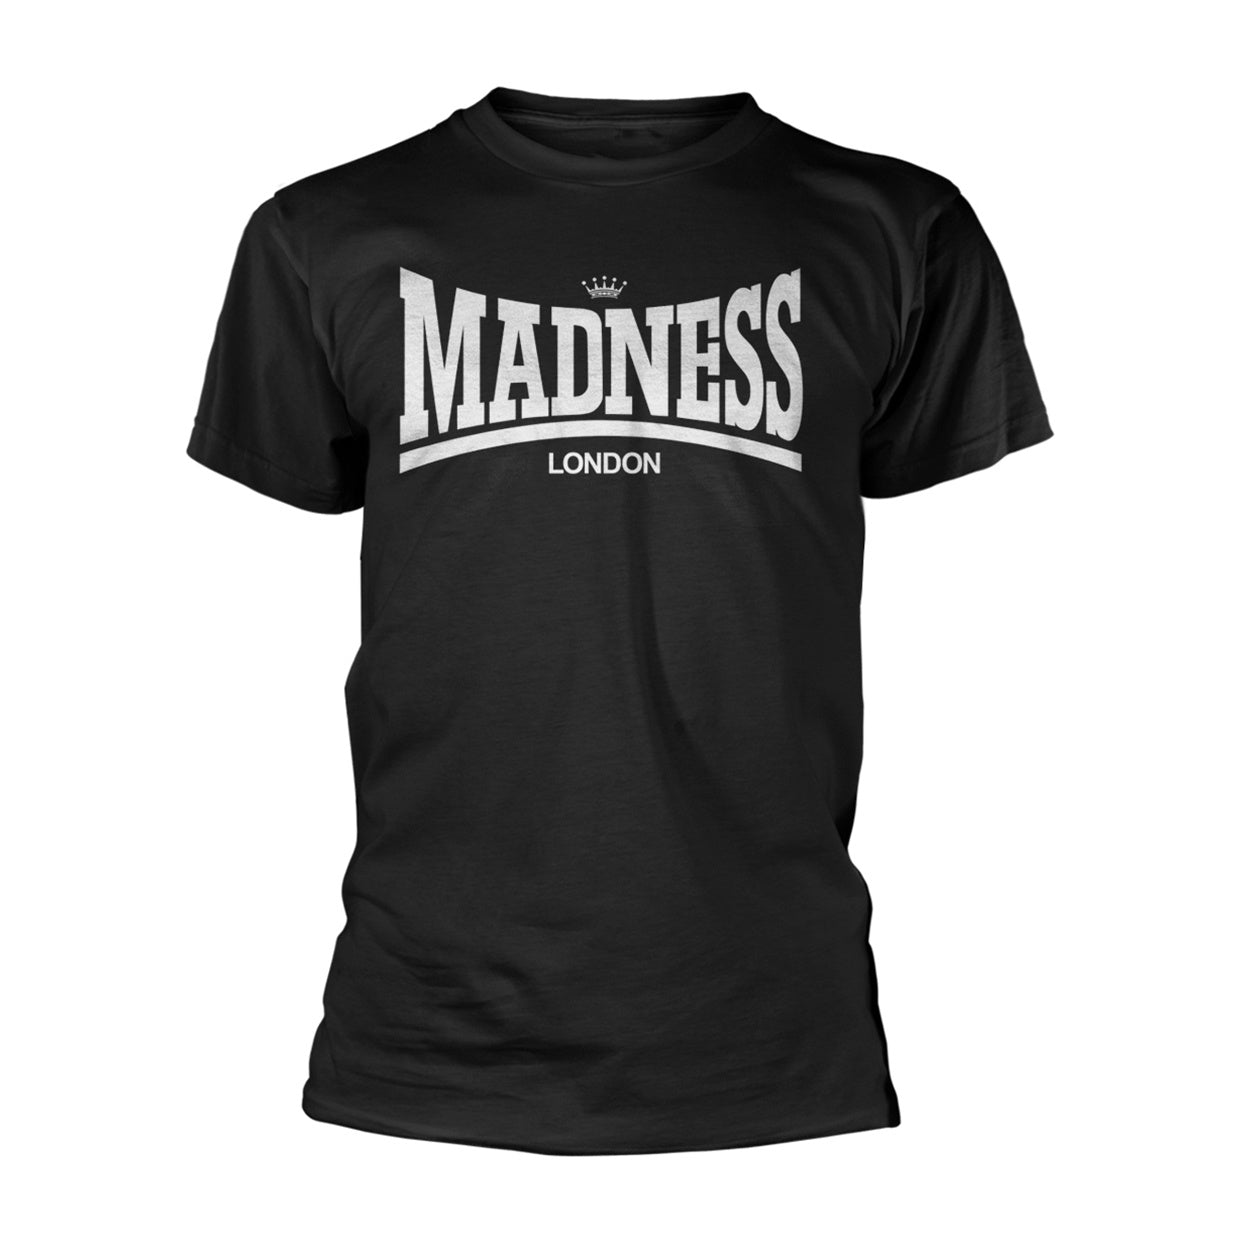 MADNESS - Madsdale T-Shirt